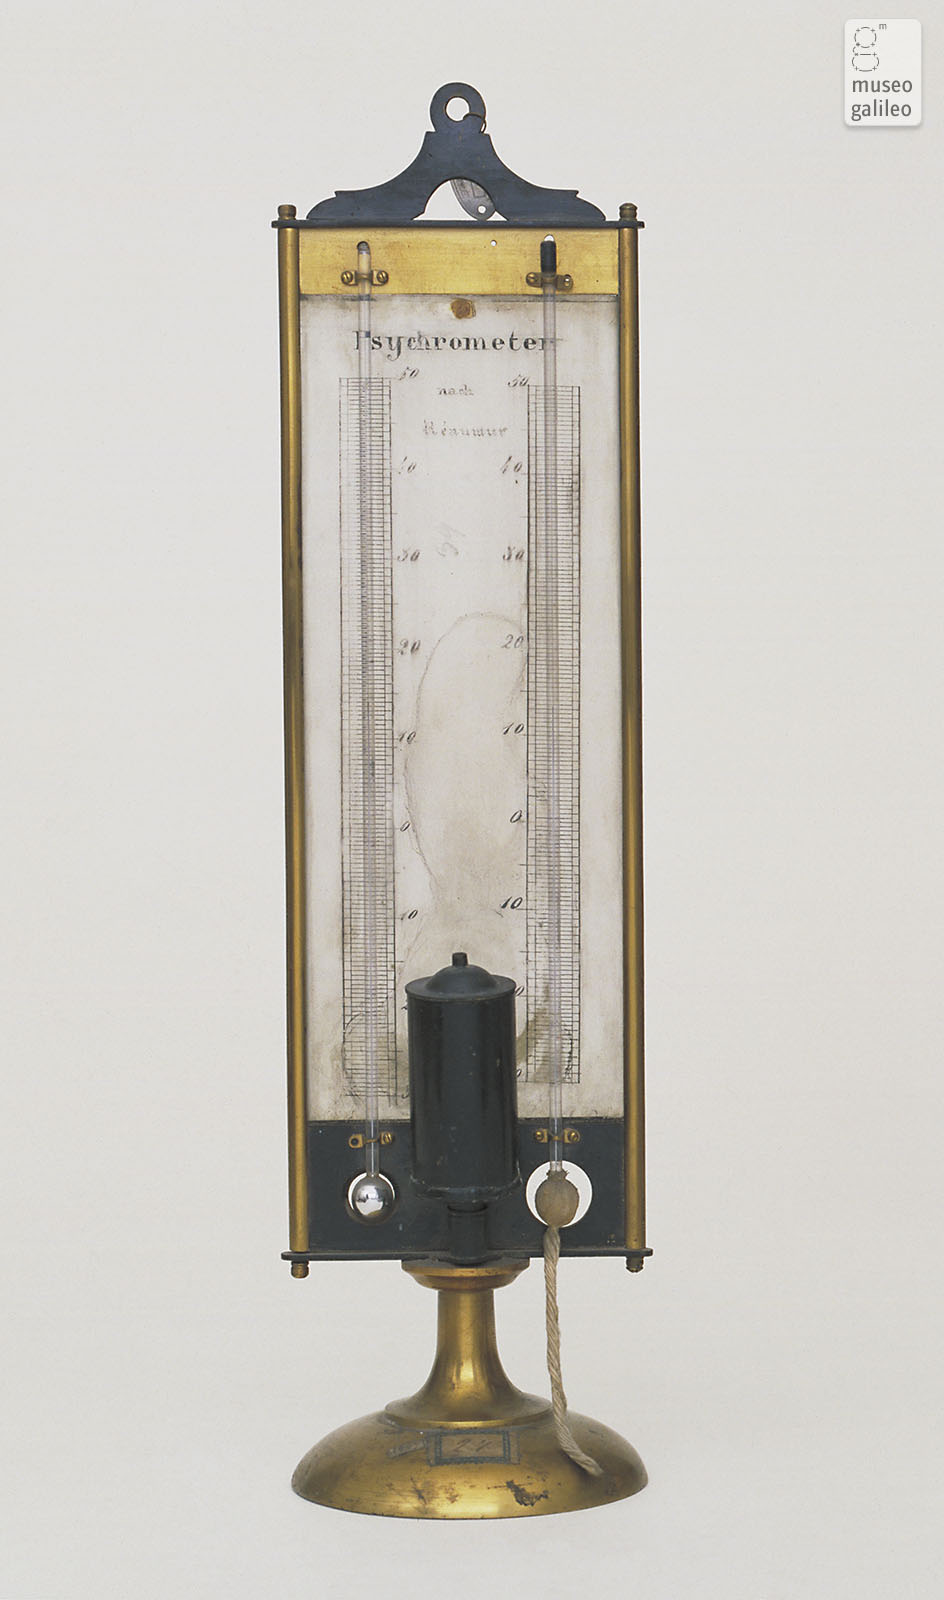 Psychrometer - wet and dry bulb thermometer (Inv. 3467)